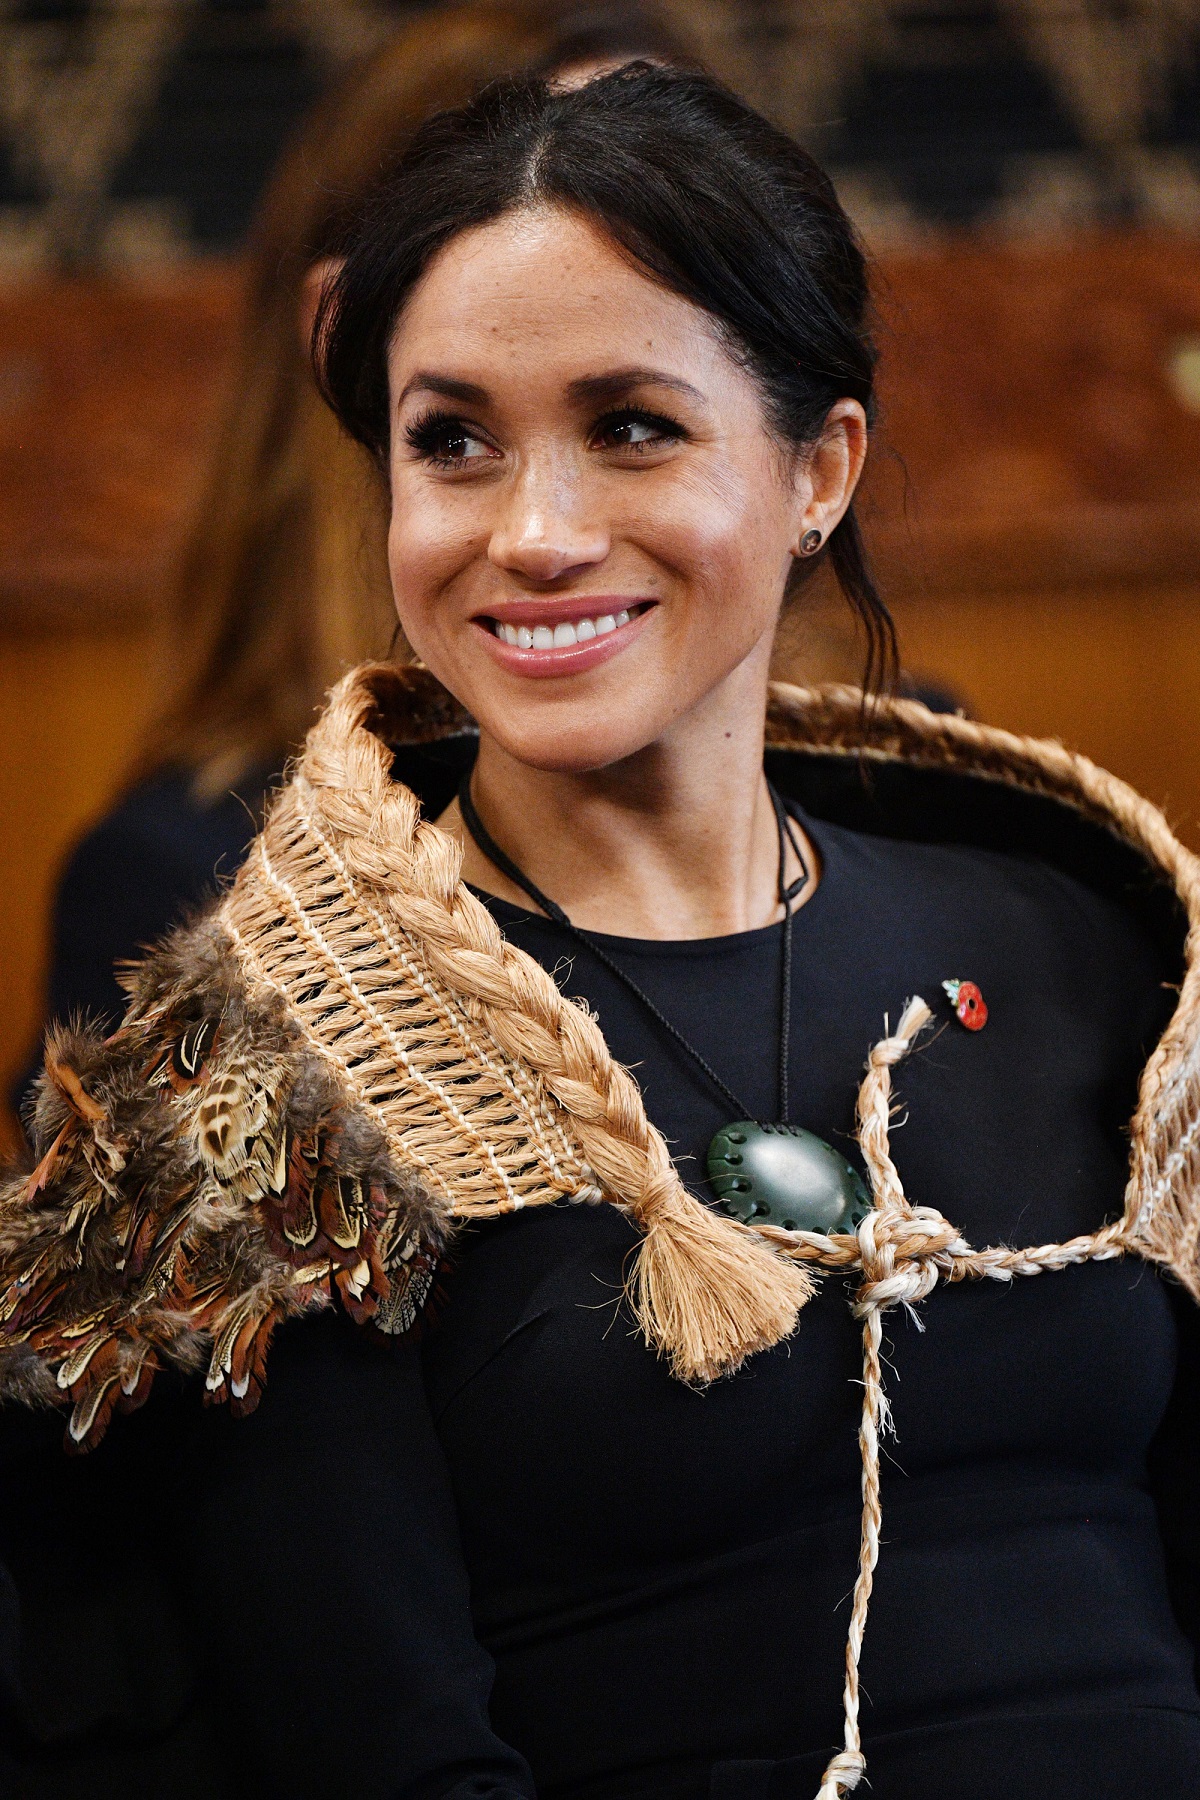 Meghan Markle smiling during visit to Te Papaiouru Marae for a formal powhiri and luncheon